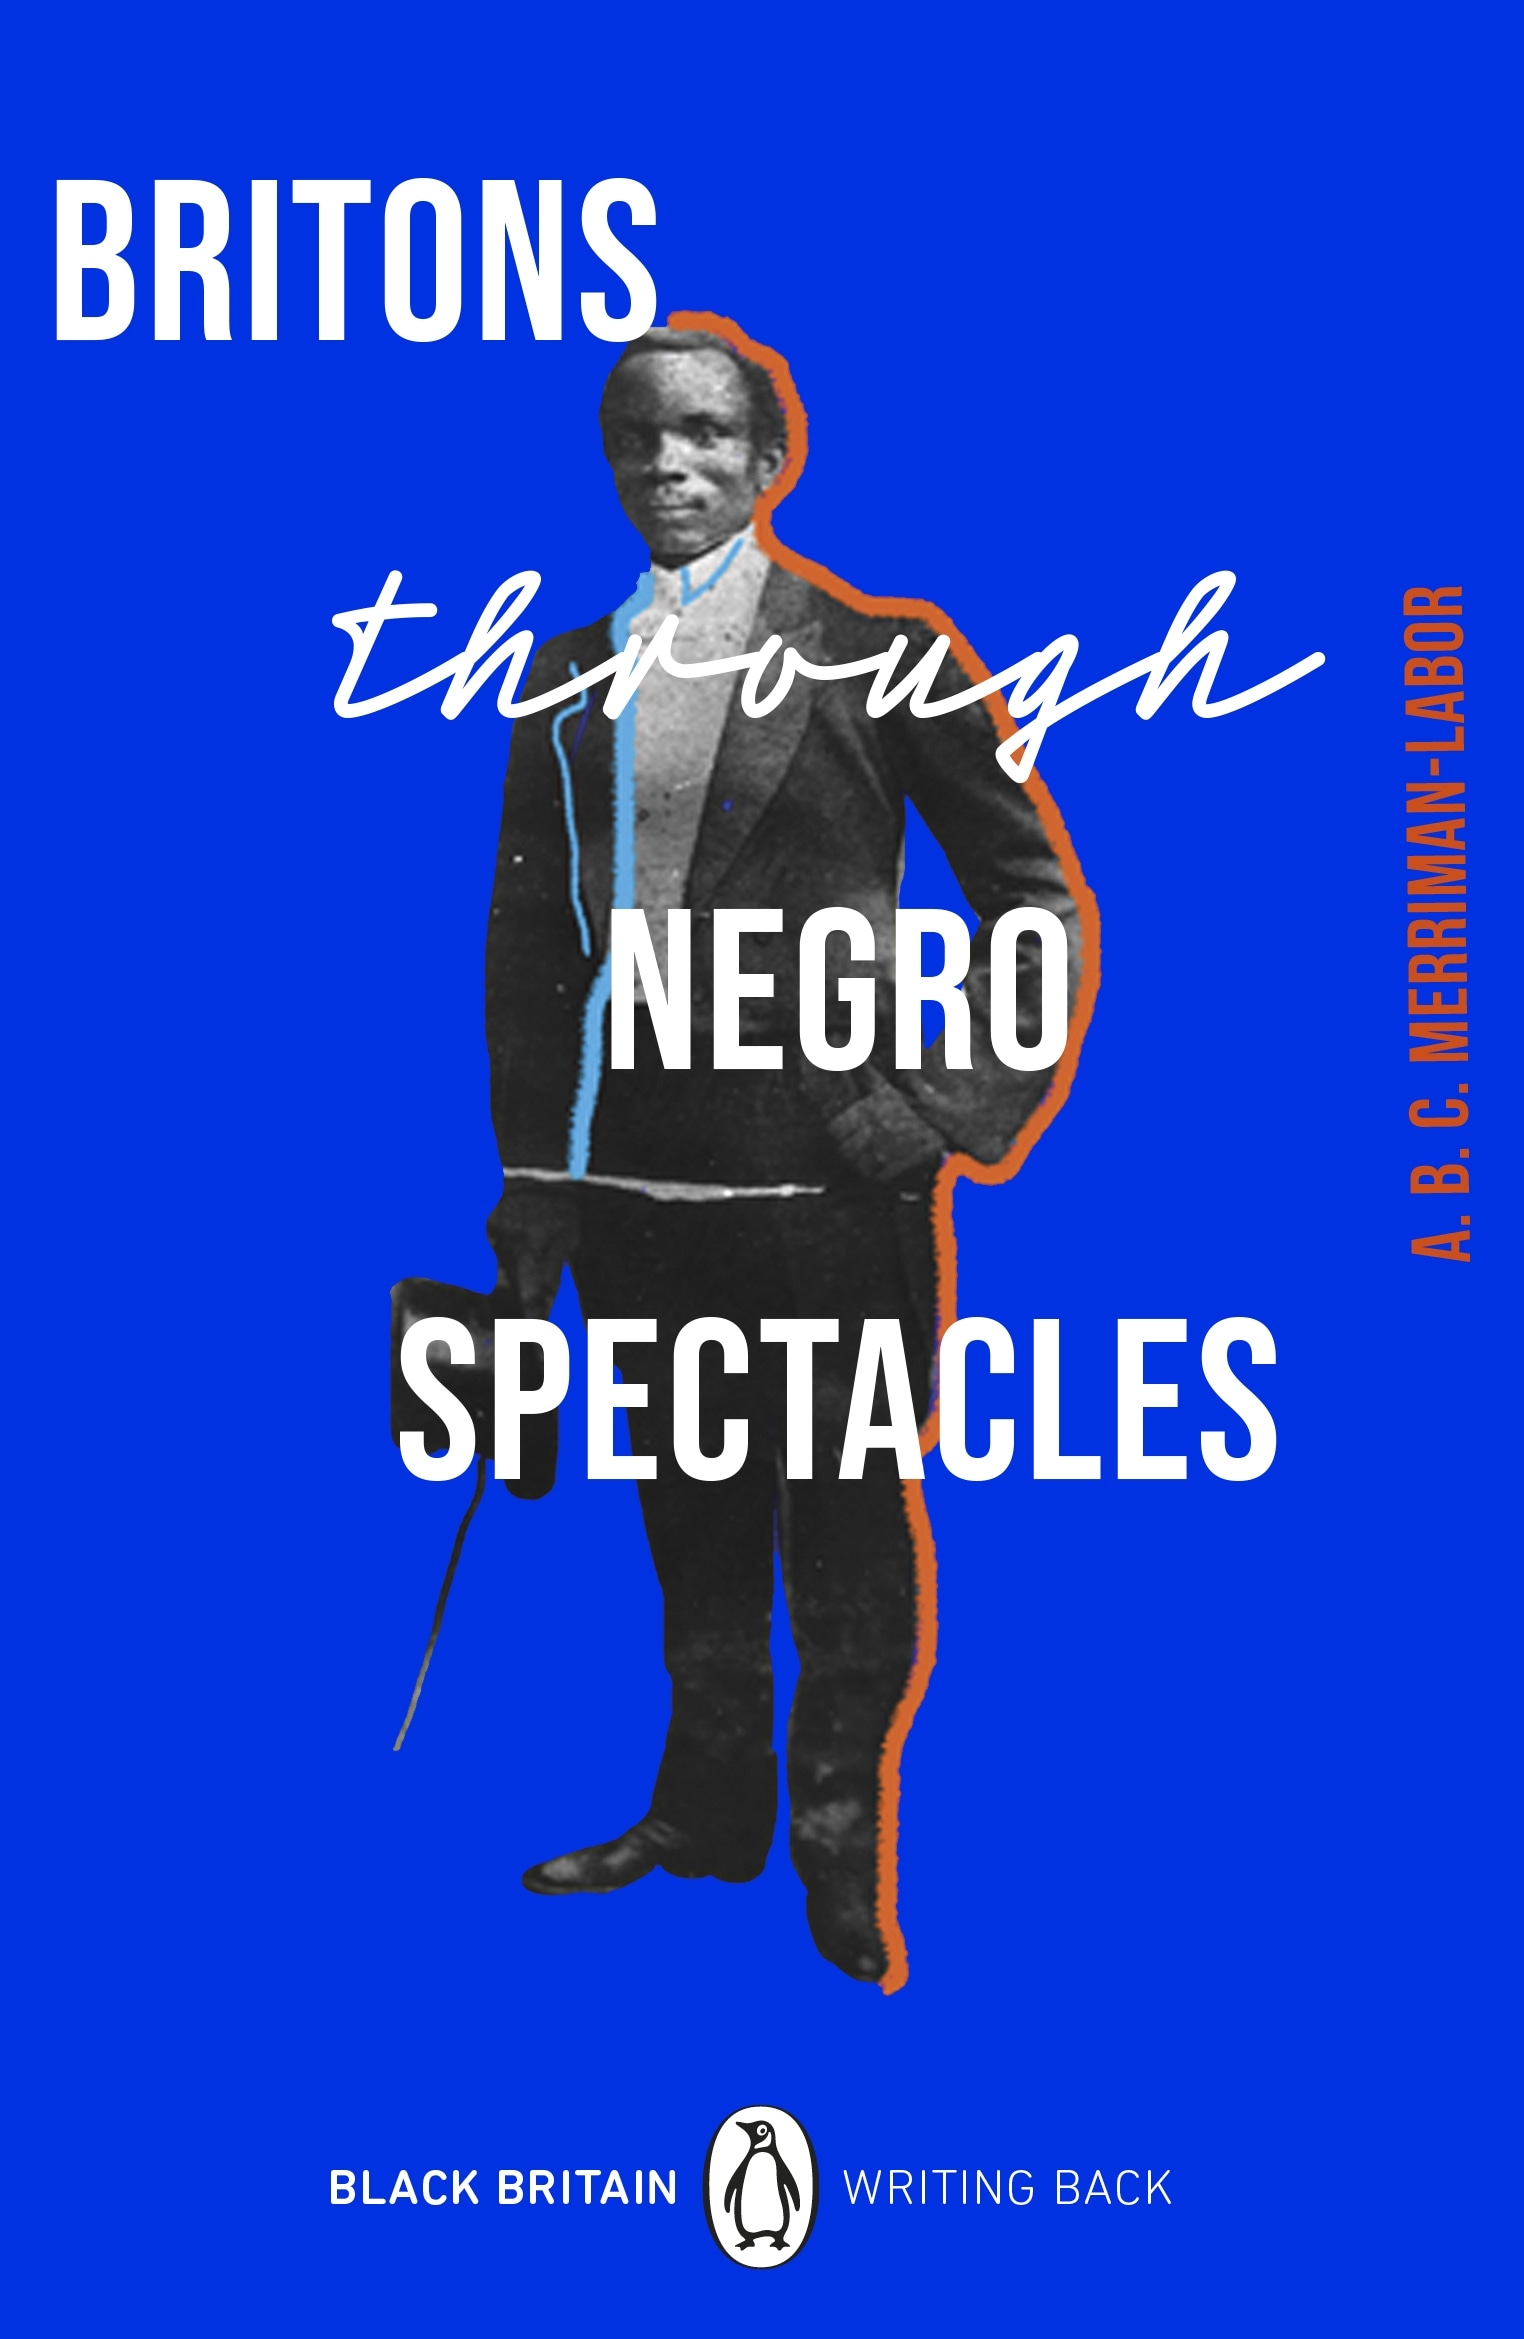 Book “Britons Through Negro Spectacles” by ABC Merriman-Labor — February 3, 2022